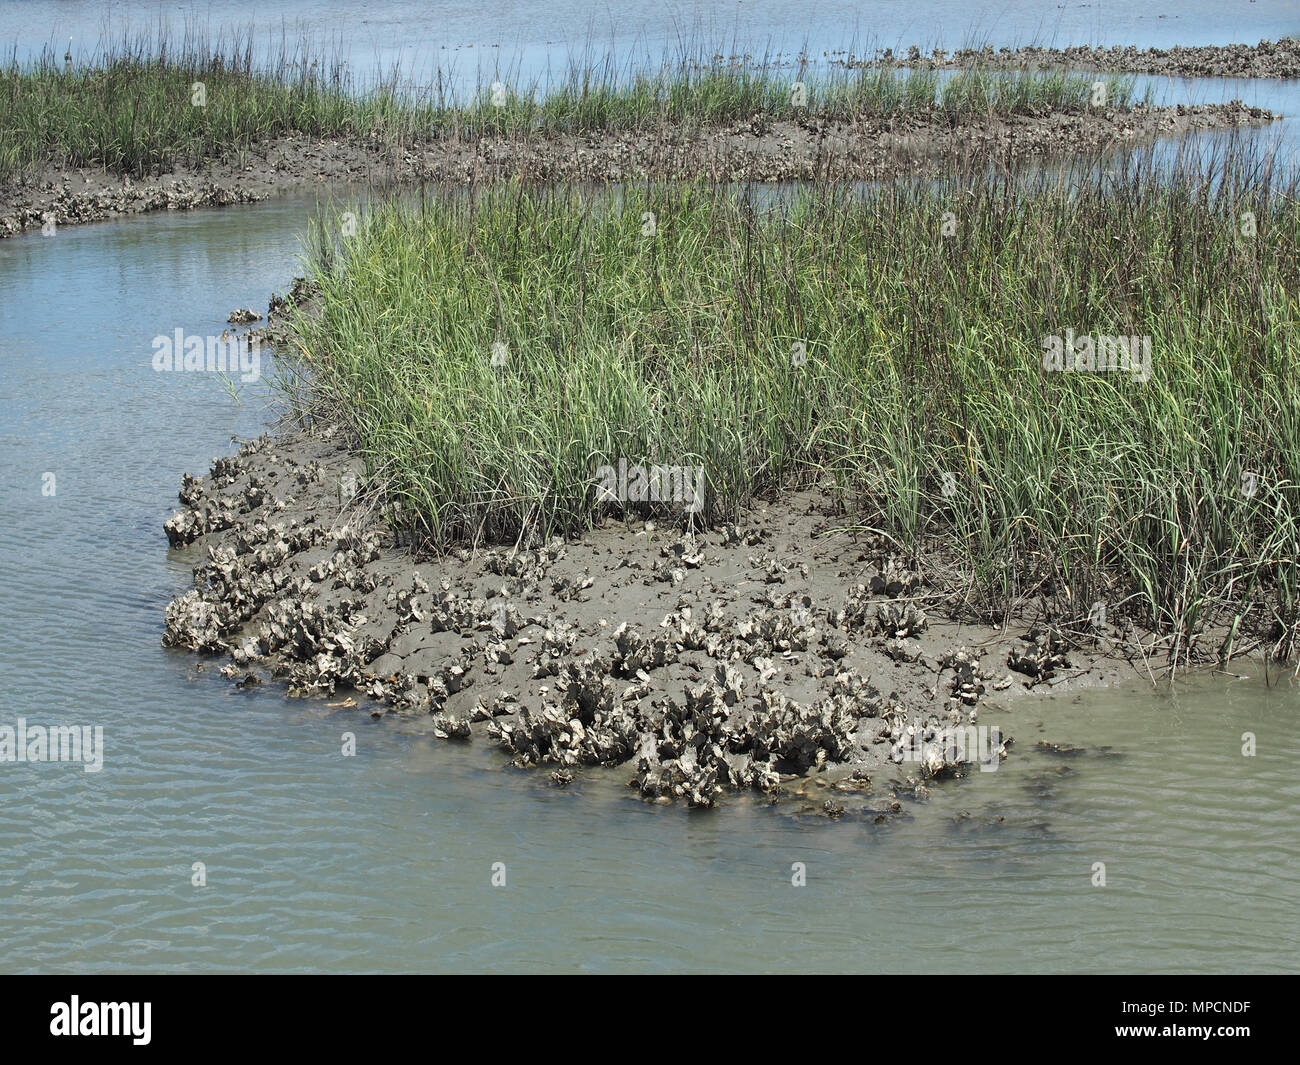 Oyster beds in the Matanzas River estuary, St. Augustine, Florida, USA, 2018, © Katharine Andriotis Stock Photo